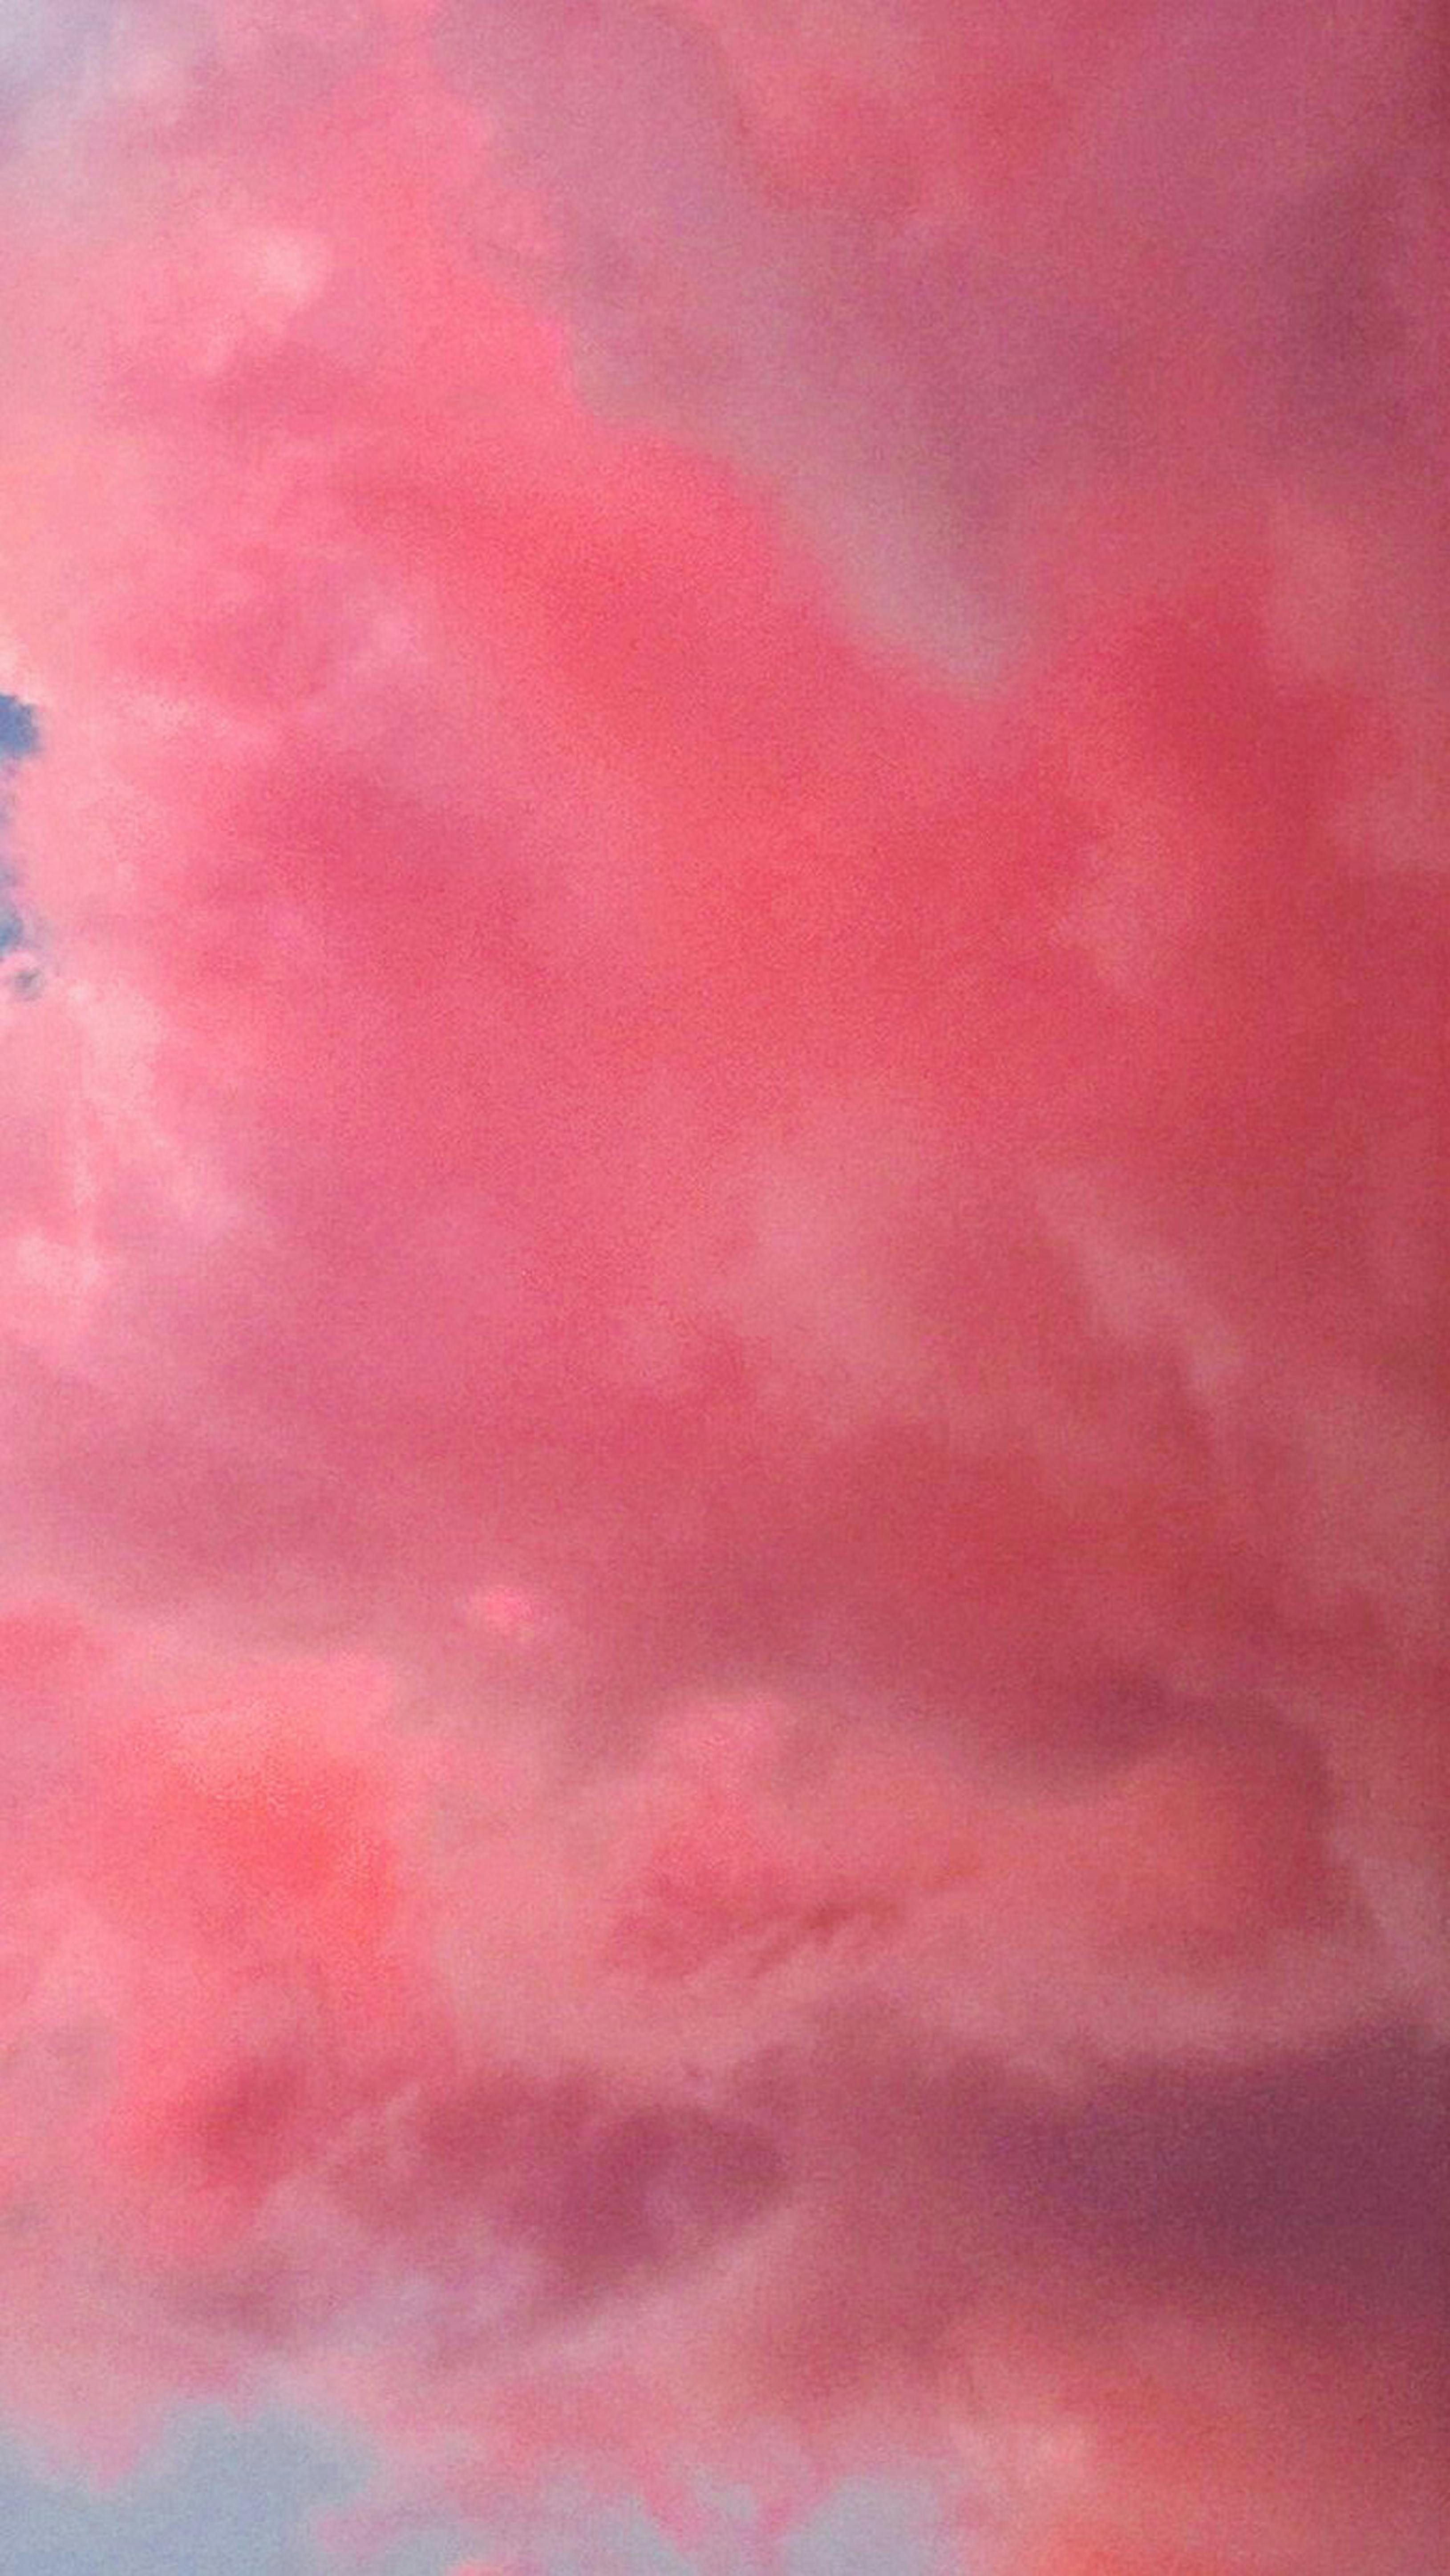 Free stock photo of blue, cloudy sky, pink